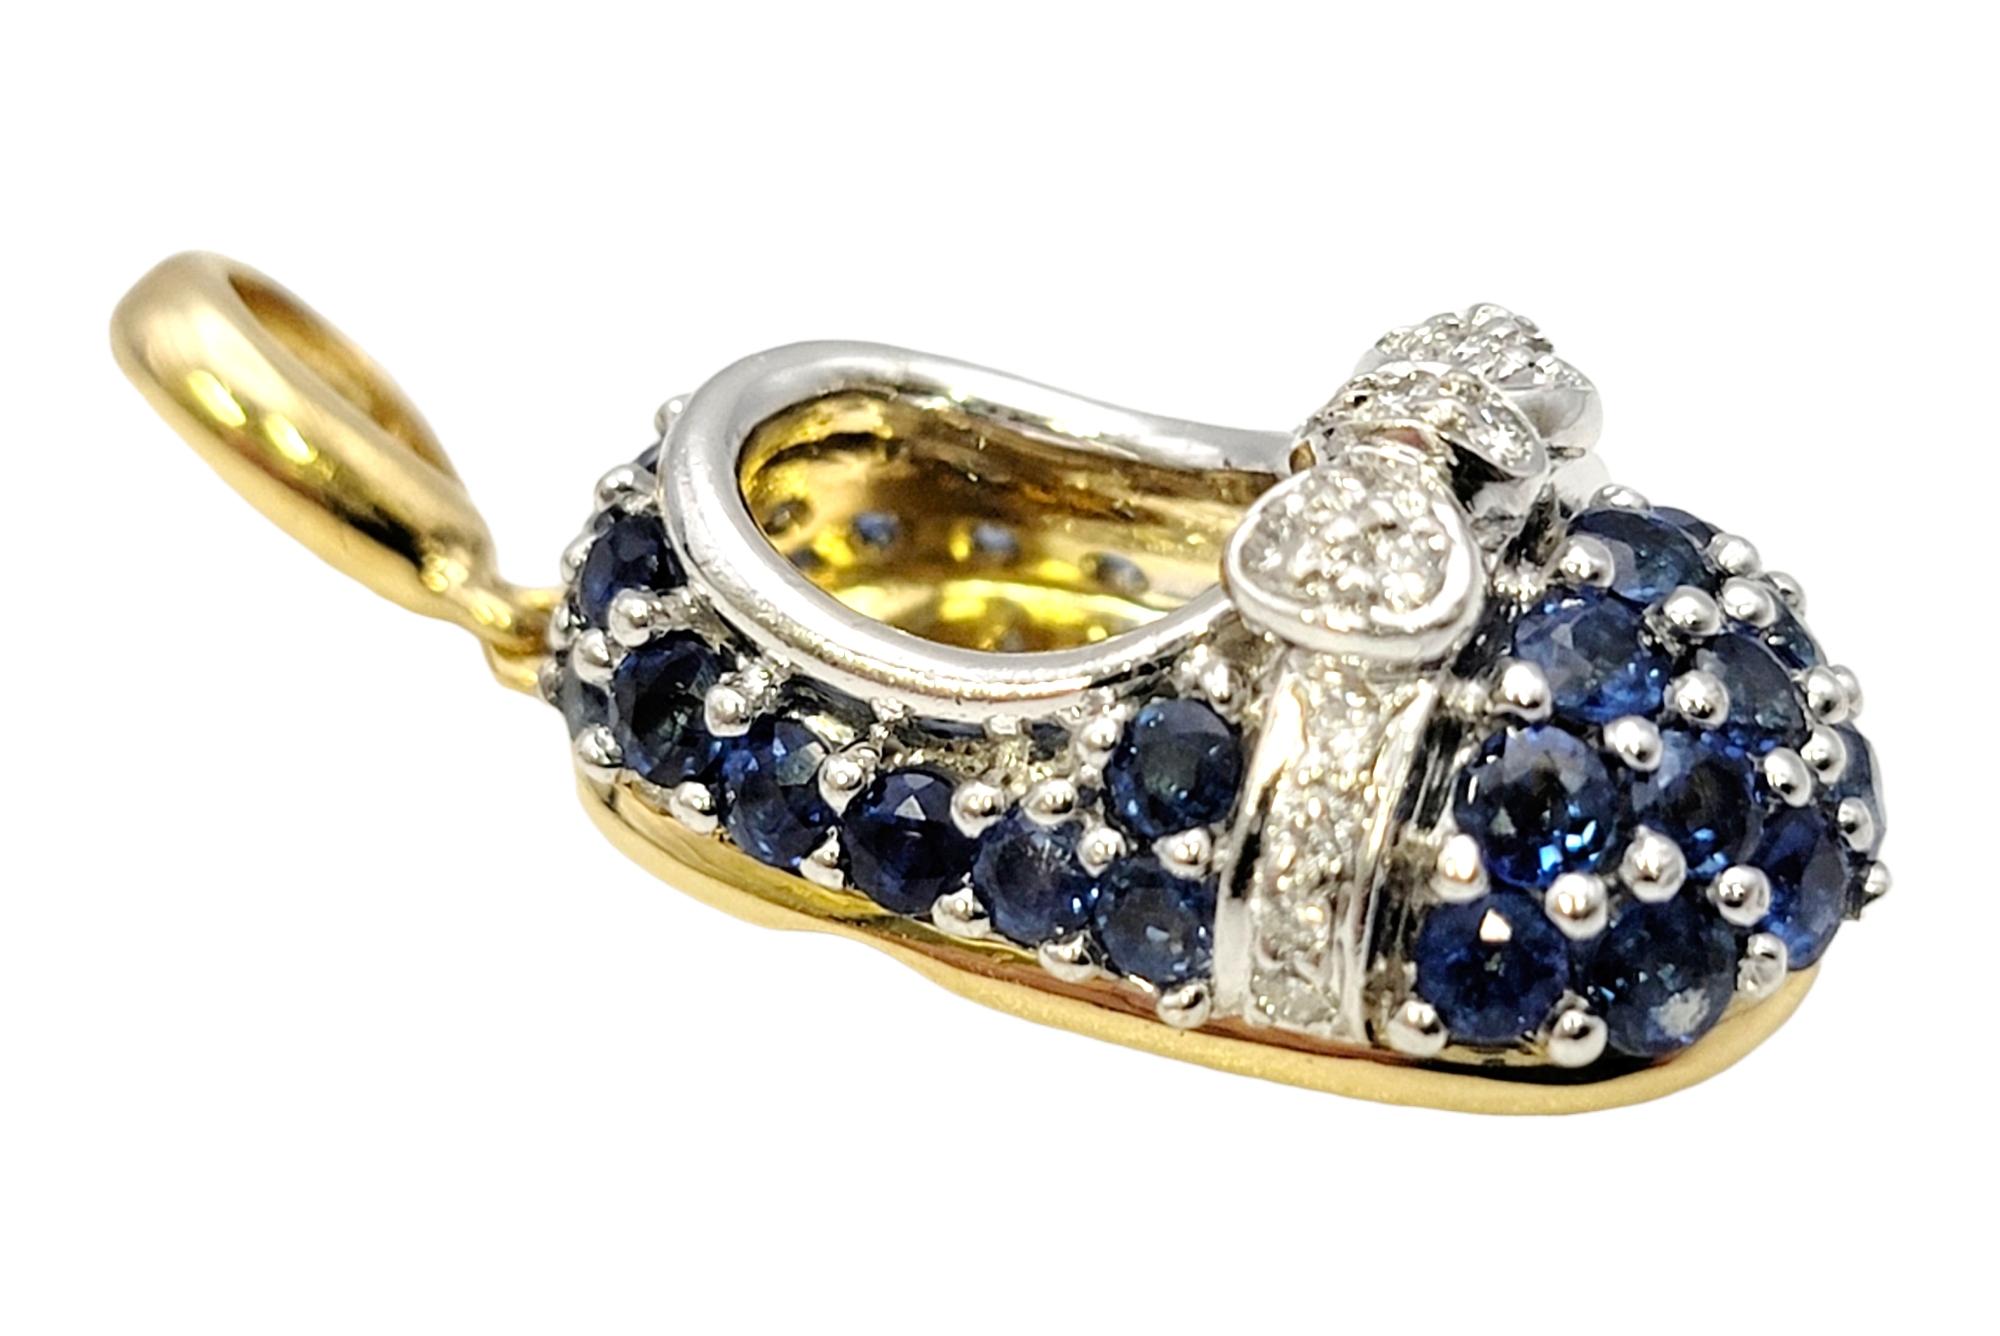 This charming pendant by Aaron Basha will add an elegant yet playful touch to your look. Embellished with natural blue sapphires and a white diamond bow, this sparkling baby shoe pendant / charm is the perfect memento to add to your favorite